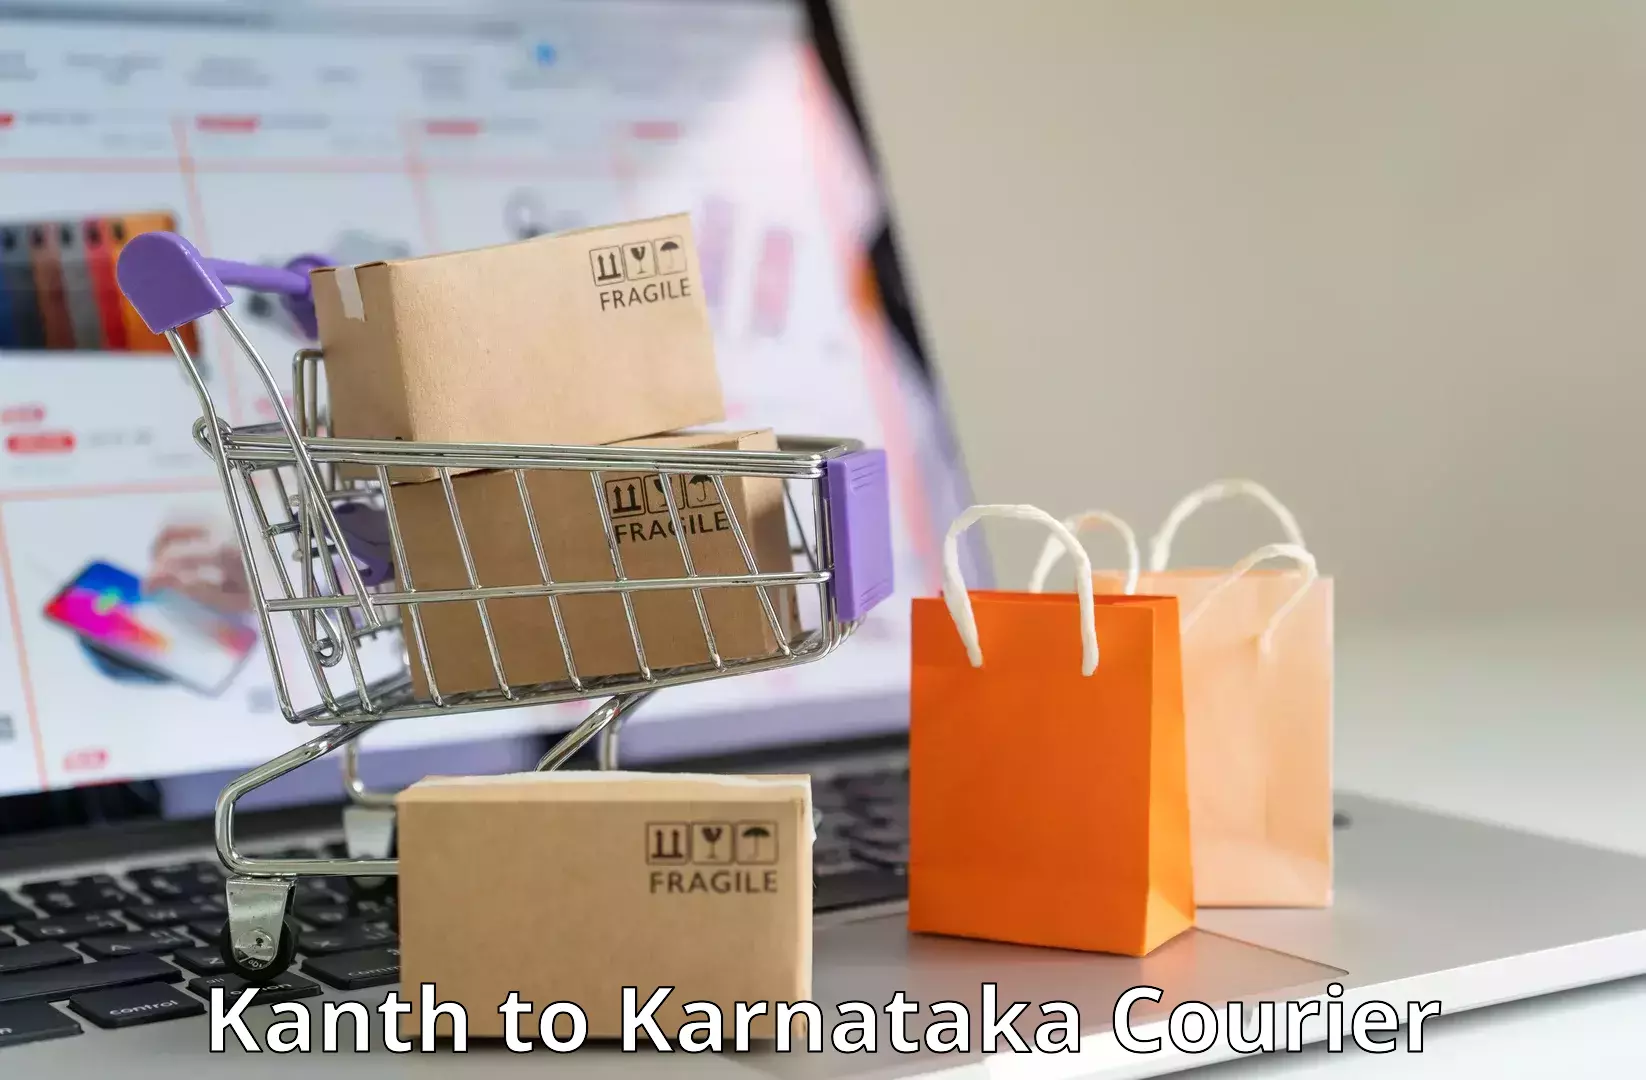 Cost-effective courier options Kanth to Hungund